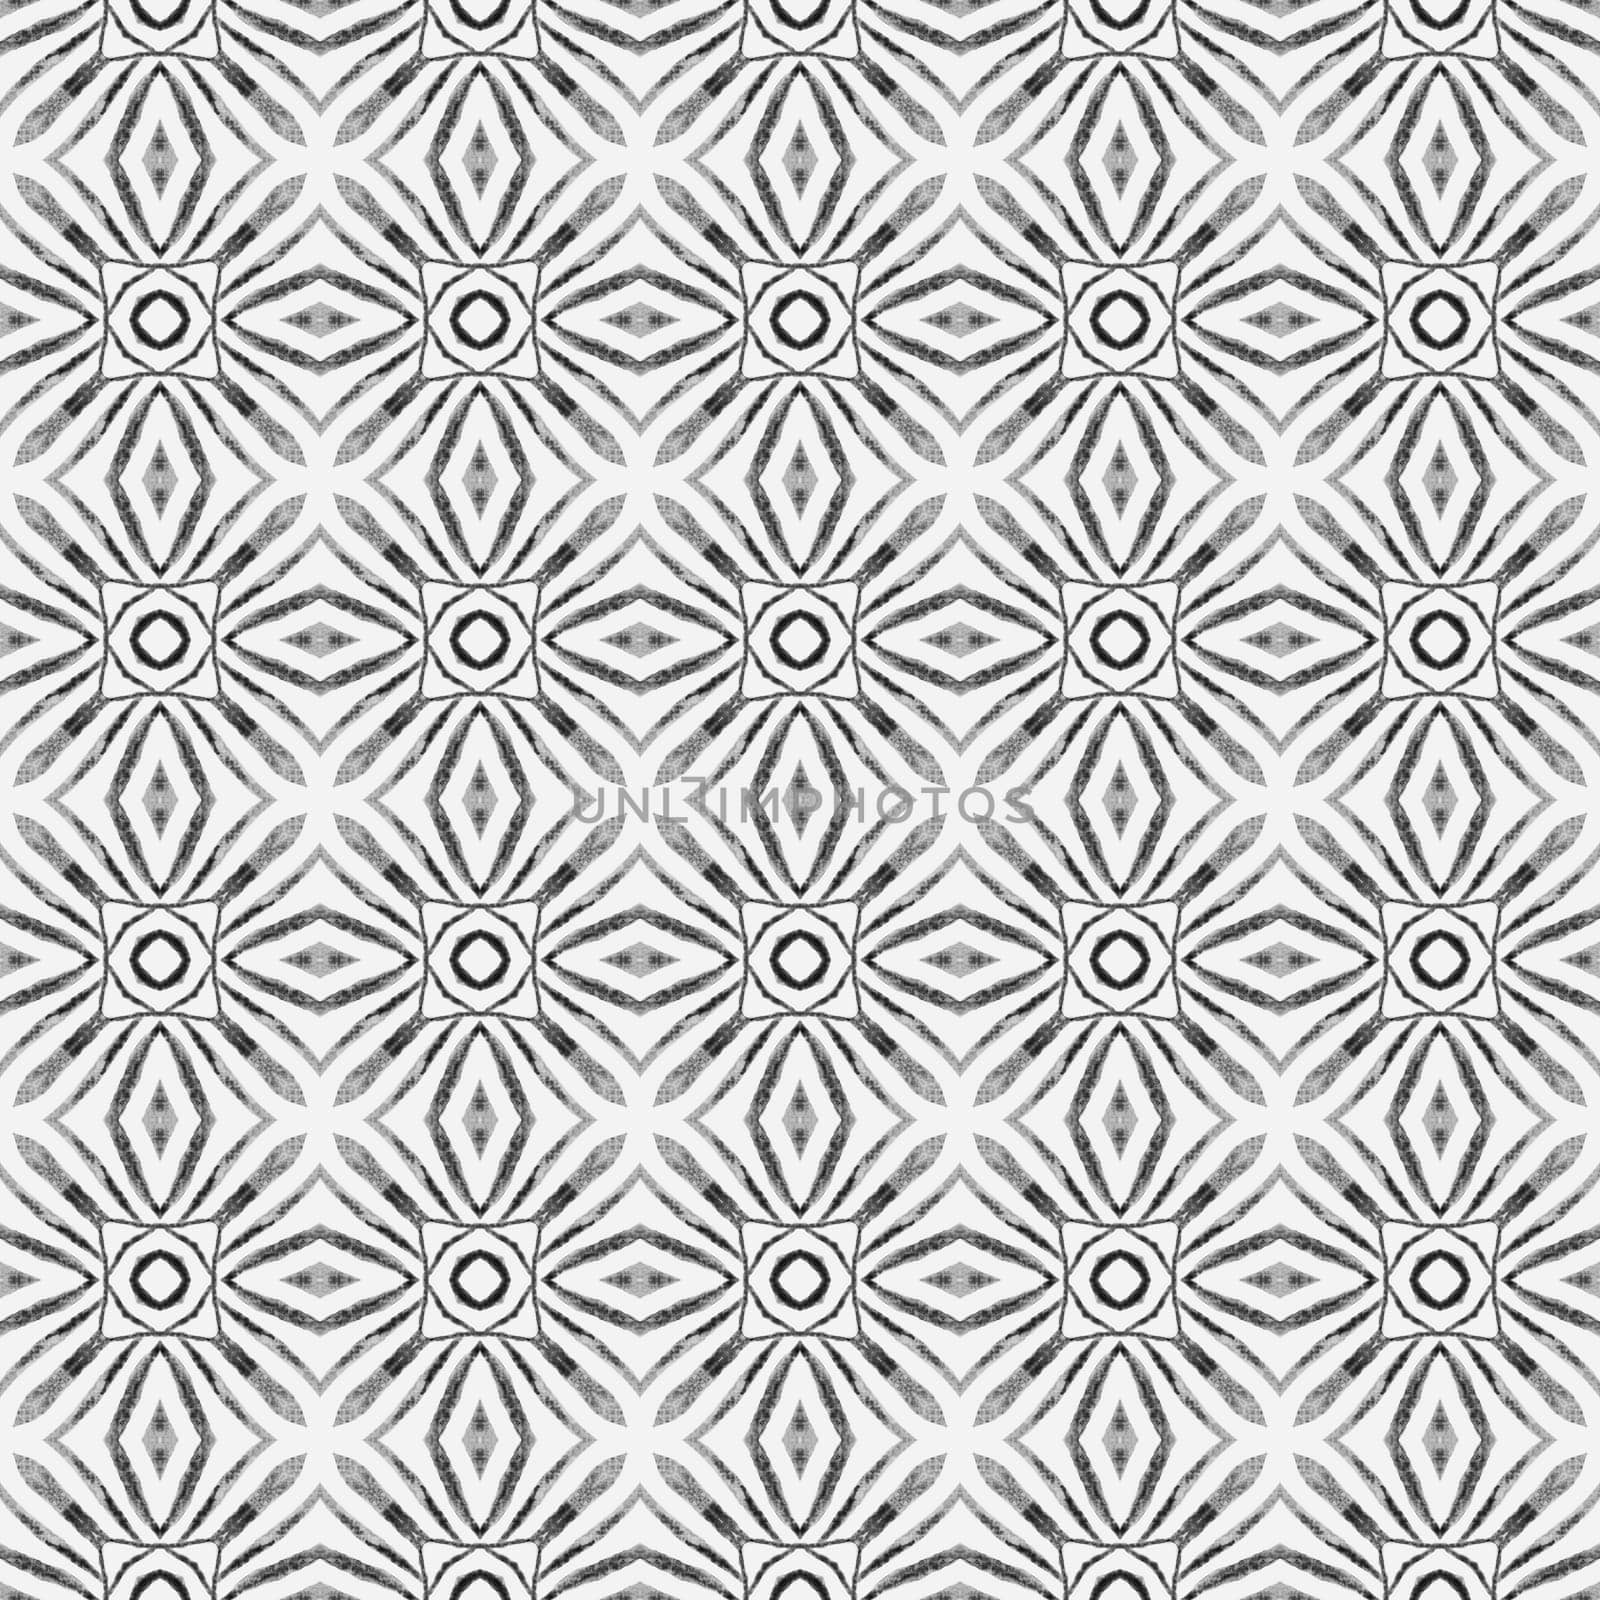 Tiled watercolor background. Black and white sightly boho chic summer design. Textile ready optimal print, swimwear fabric, wallpaper, wrapping. Hand painted tiled watercolor border.